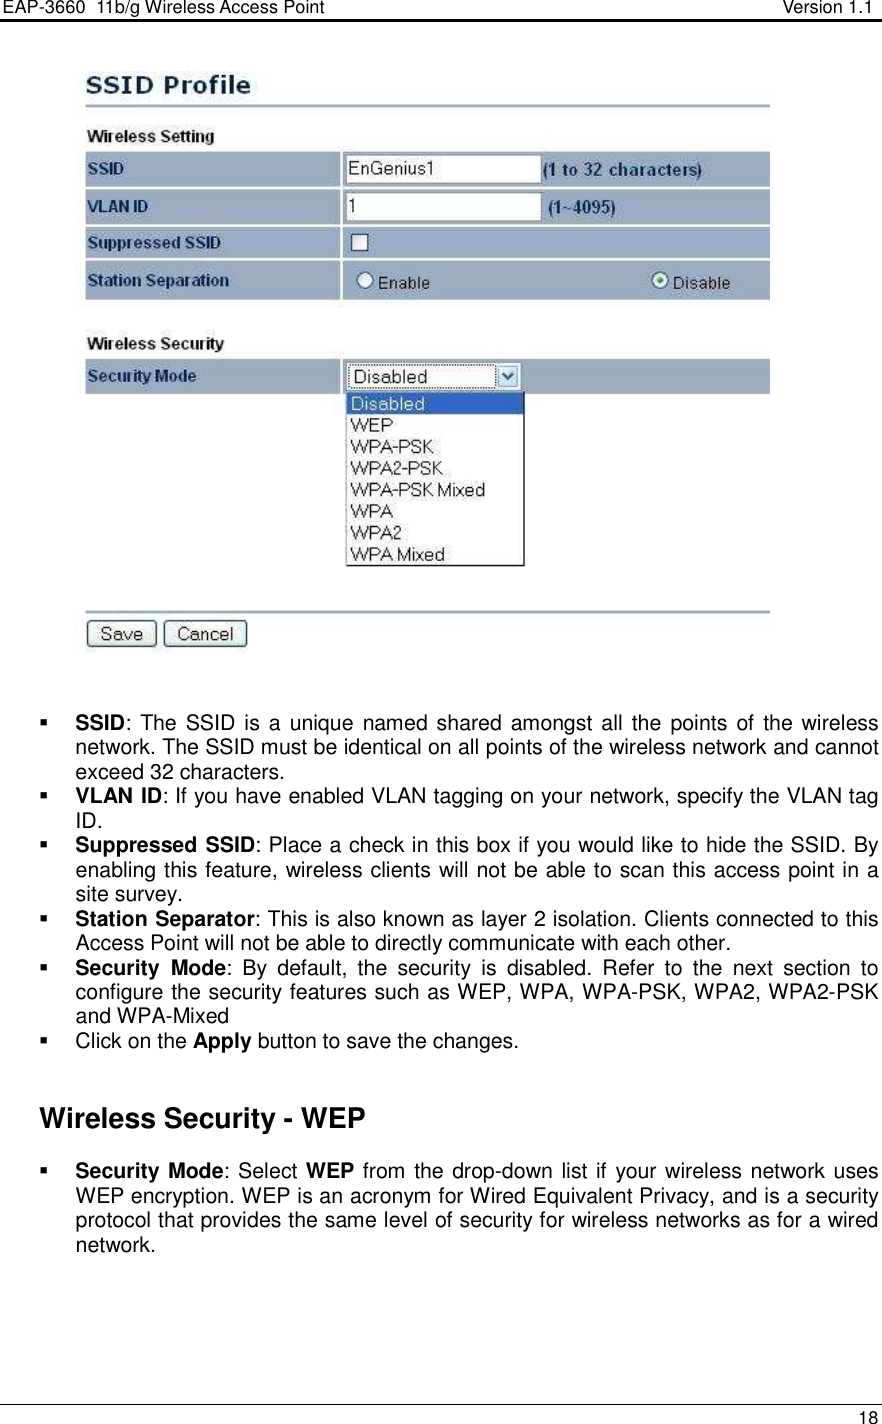 EAP-3660  11b/g Wireless Access Point                                                           Version 1.1    18      SSID: The SSID is a unique named shared  amongst all the points of the wireless network. The SSID must be identical on all points of the wireless network and cannot exceed 32 characters.   VLAN ID: If you have enabled VLAN tagging on your network, specify the VLAN tag ID.   Suppressed SSID: Place a check in this box if you would like to hide the SSID. By enabling this feature, wireless clients will not be able to scan this access point in a site survey.  Station Separator: This is also known as layer 2 isolation. Clients connected to this Access Point will not be able to directly communicate with each other.   Security  Mode:  By  default,  the  security  is  disabled.  Refer  to  the  next  section  to configure the security features such as WEP, WPA, WPA-PSK, WPA2, WPA2-PSK and WPA-Mixed   Click on the Apply button to save the changes.      Wireless Security - WEP  Security Mode: Select WEP from the drop-down list if your wireless network uses WEP encryption. WEP is an acronym for Wired Equivalent Privacy, and is a security protocol that provides the same level of security for wireless networks as for a wired network.    